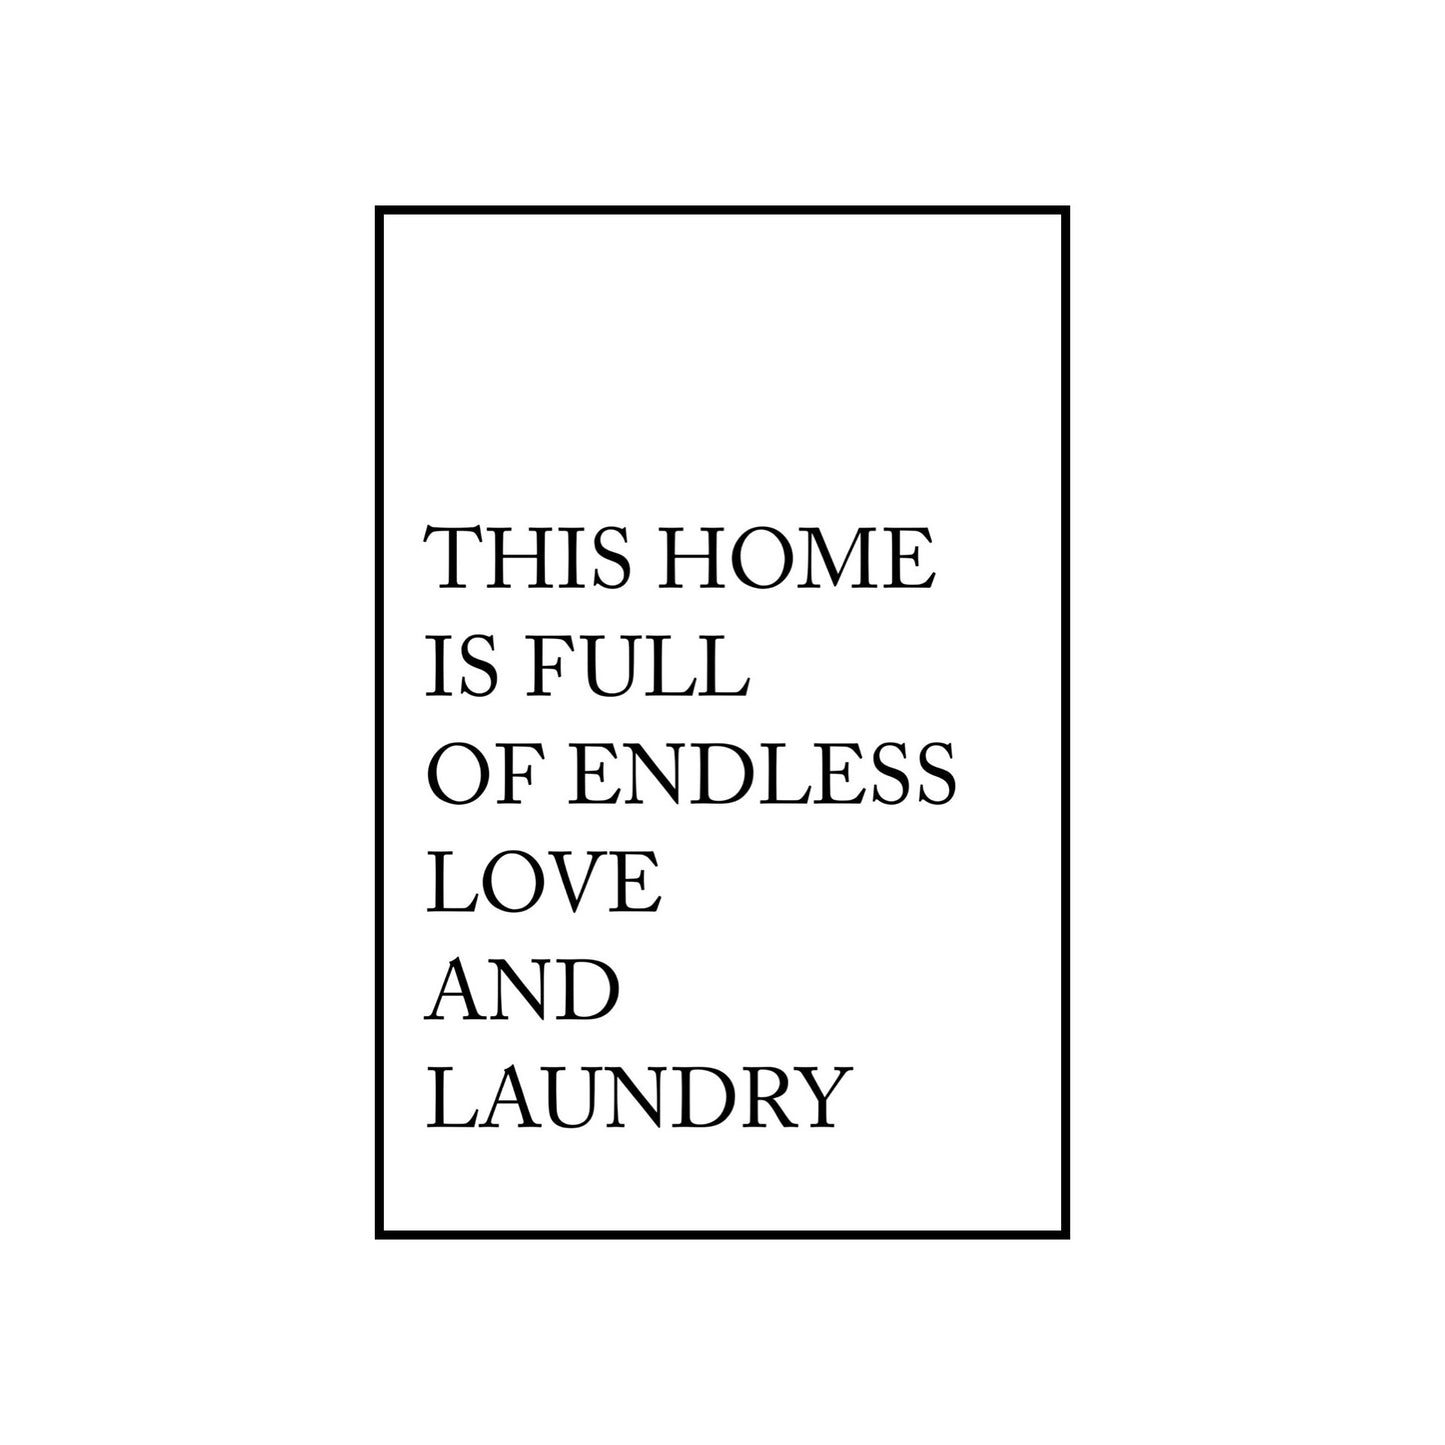 This home is full of love and laundry - THE WALL STYLIST